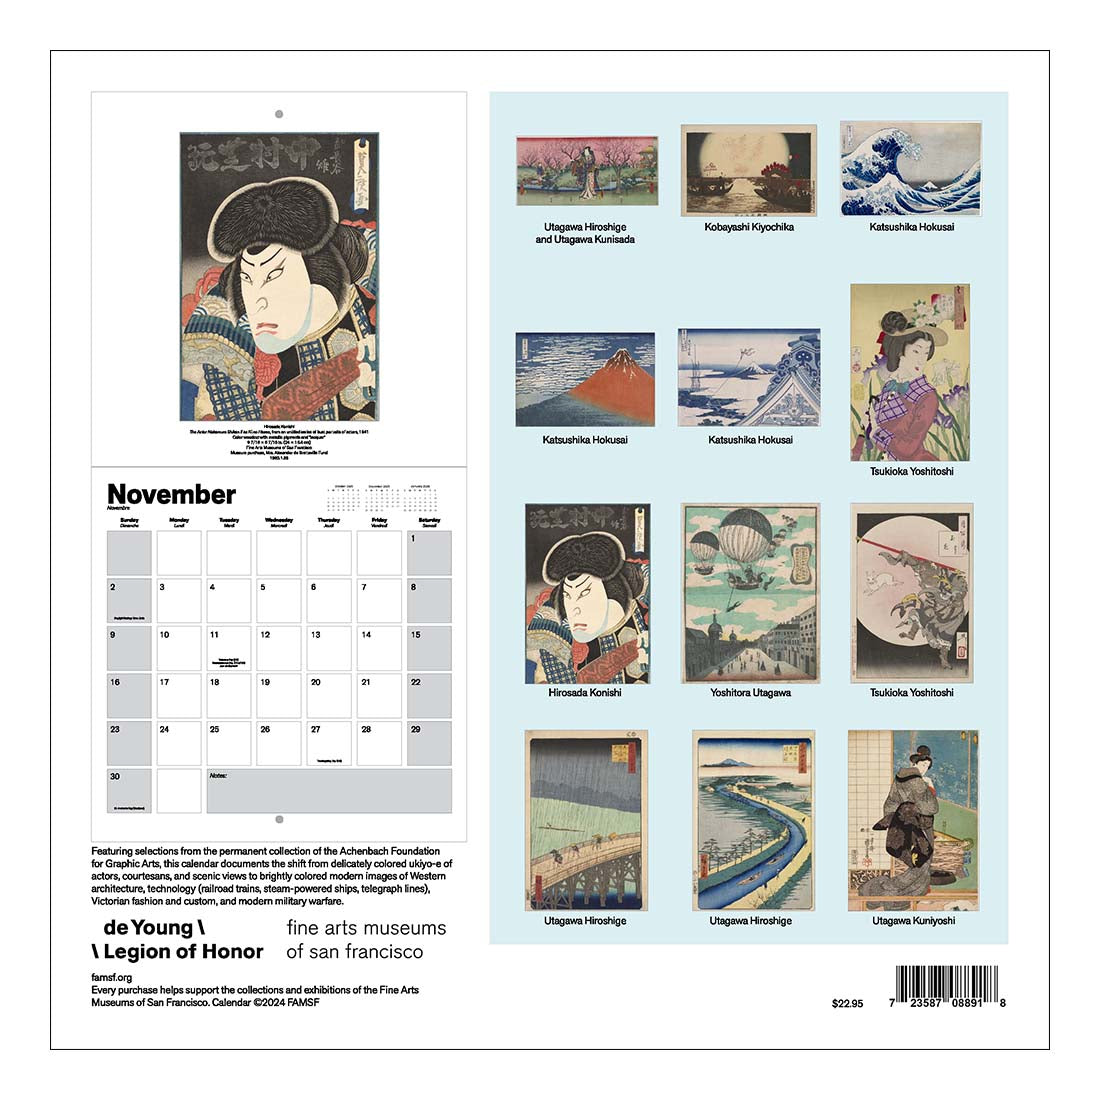 Japanese Prints in Transition 2025 Wall Calendar